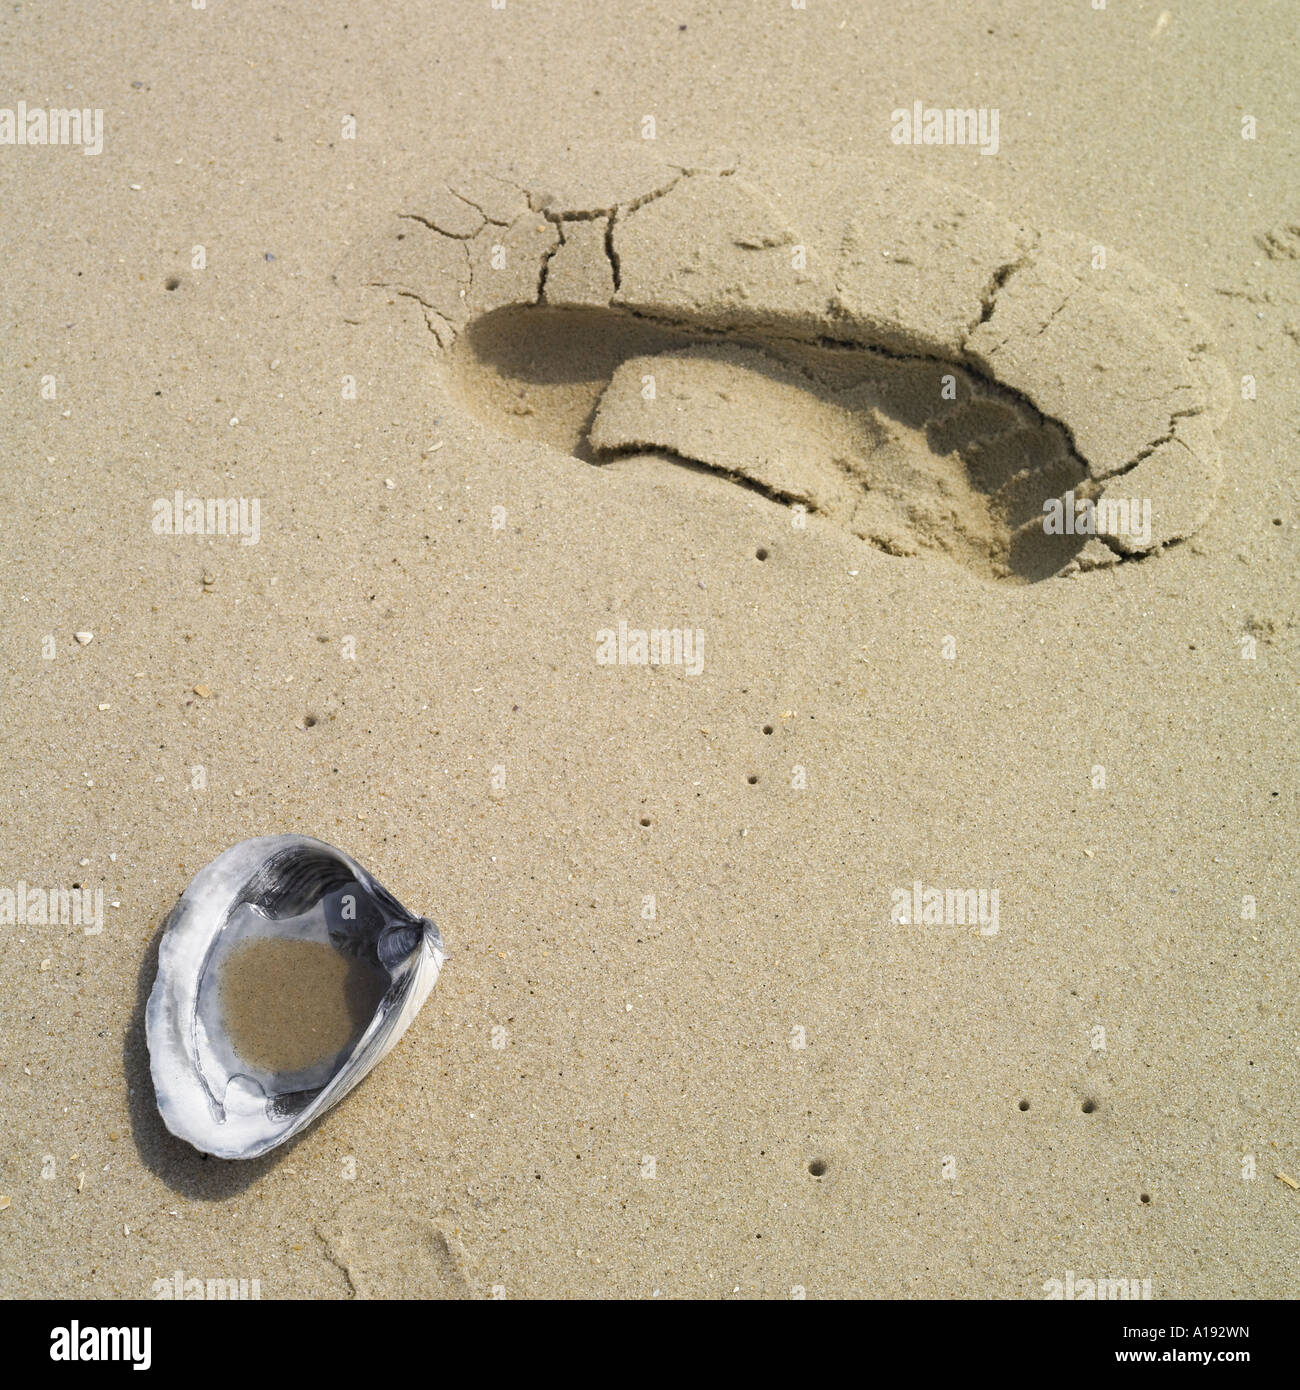 shell and foot print in sand Stock Photo